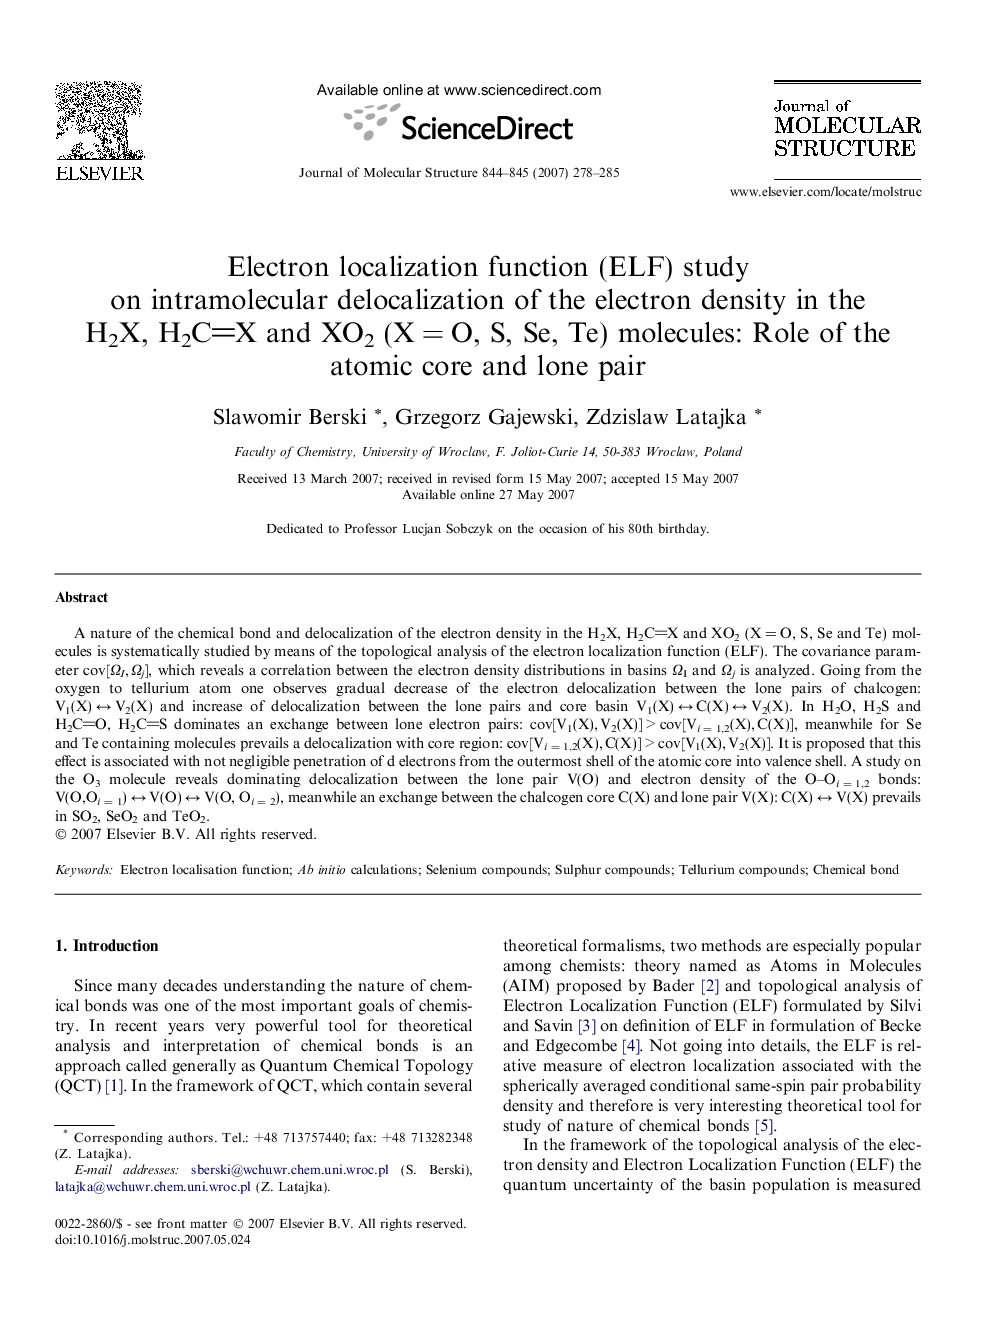 Electron localization function (ELF) study on intramolecular delocalization of the electron density in the H2X, H2CX and XO2 (XÂ =Â O, S, Se, Te) molecules: Role of the atomic core and lone pair